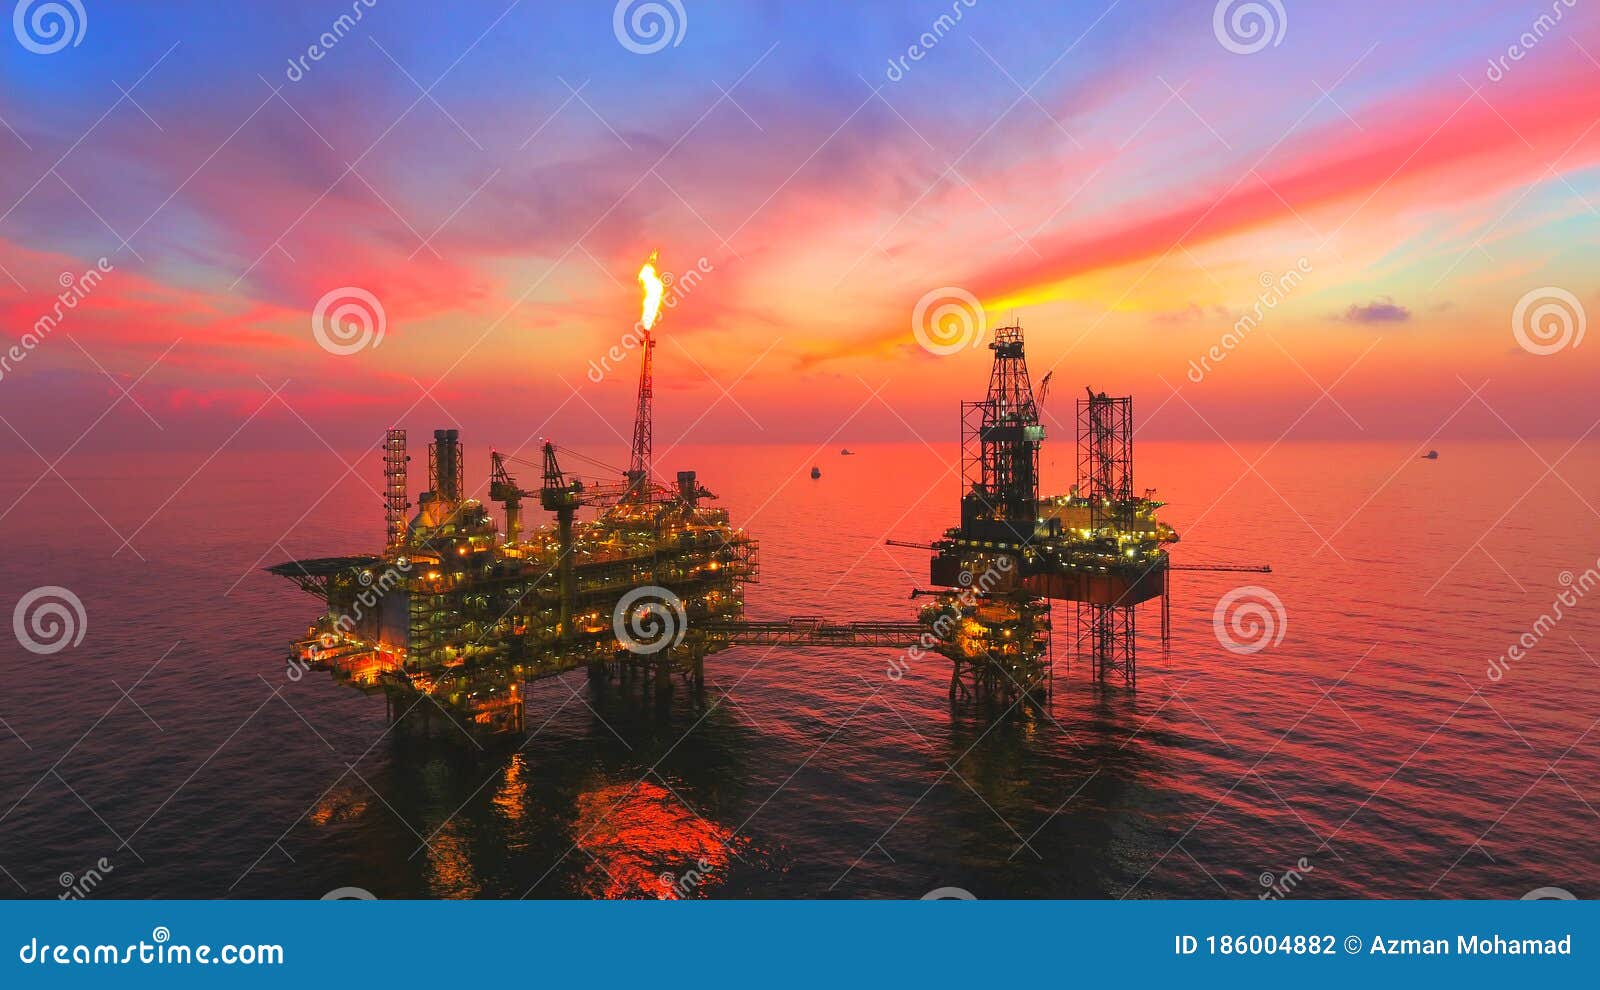 oil rig at late evening offshore areal photography during sunset